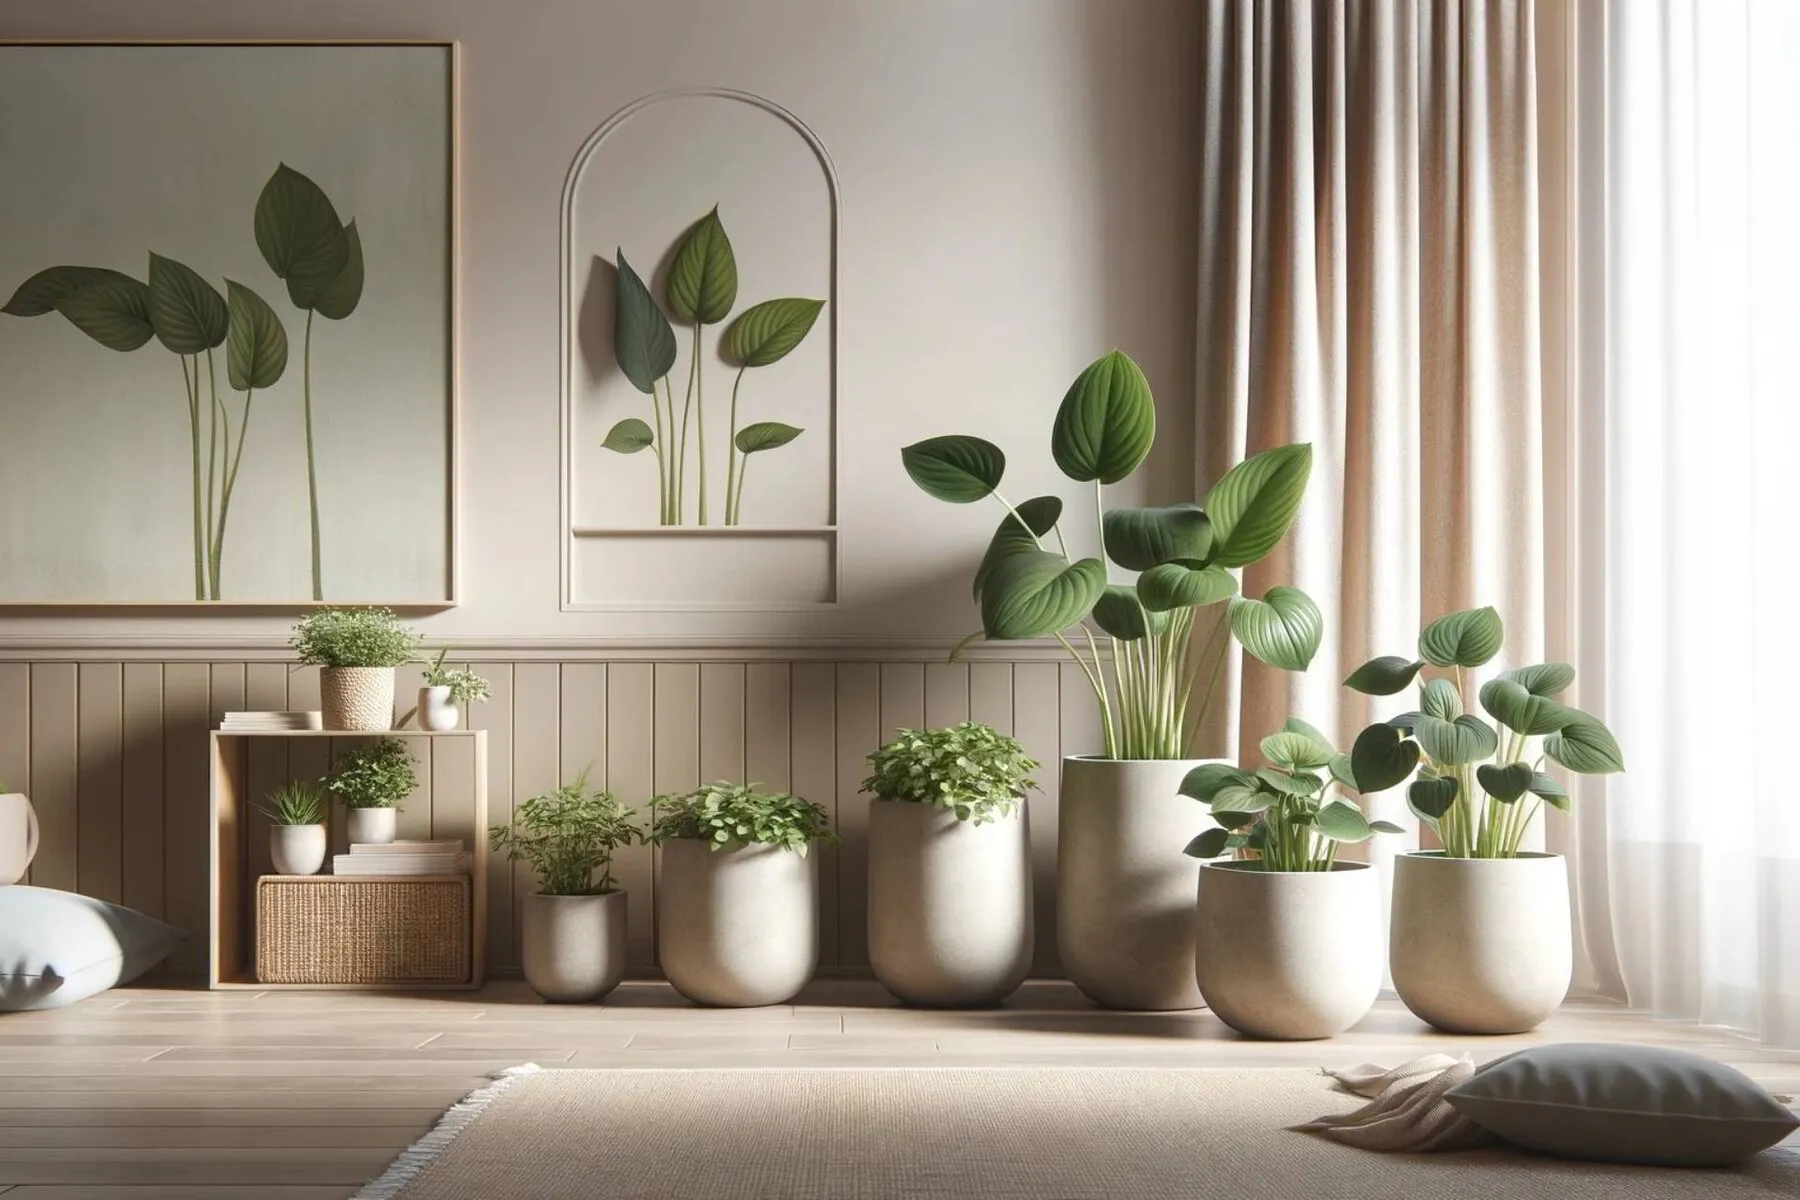 Tranquil home interior with a few Peperomia varieties strategically placed around the room